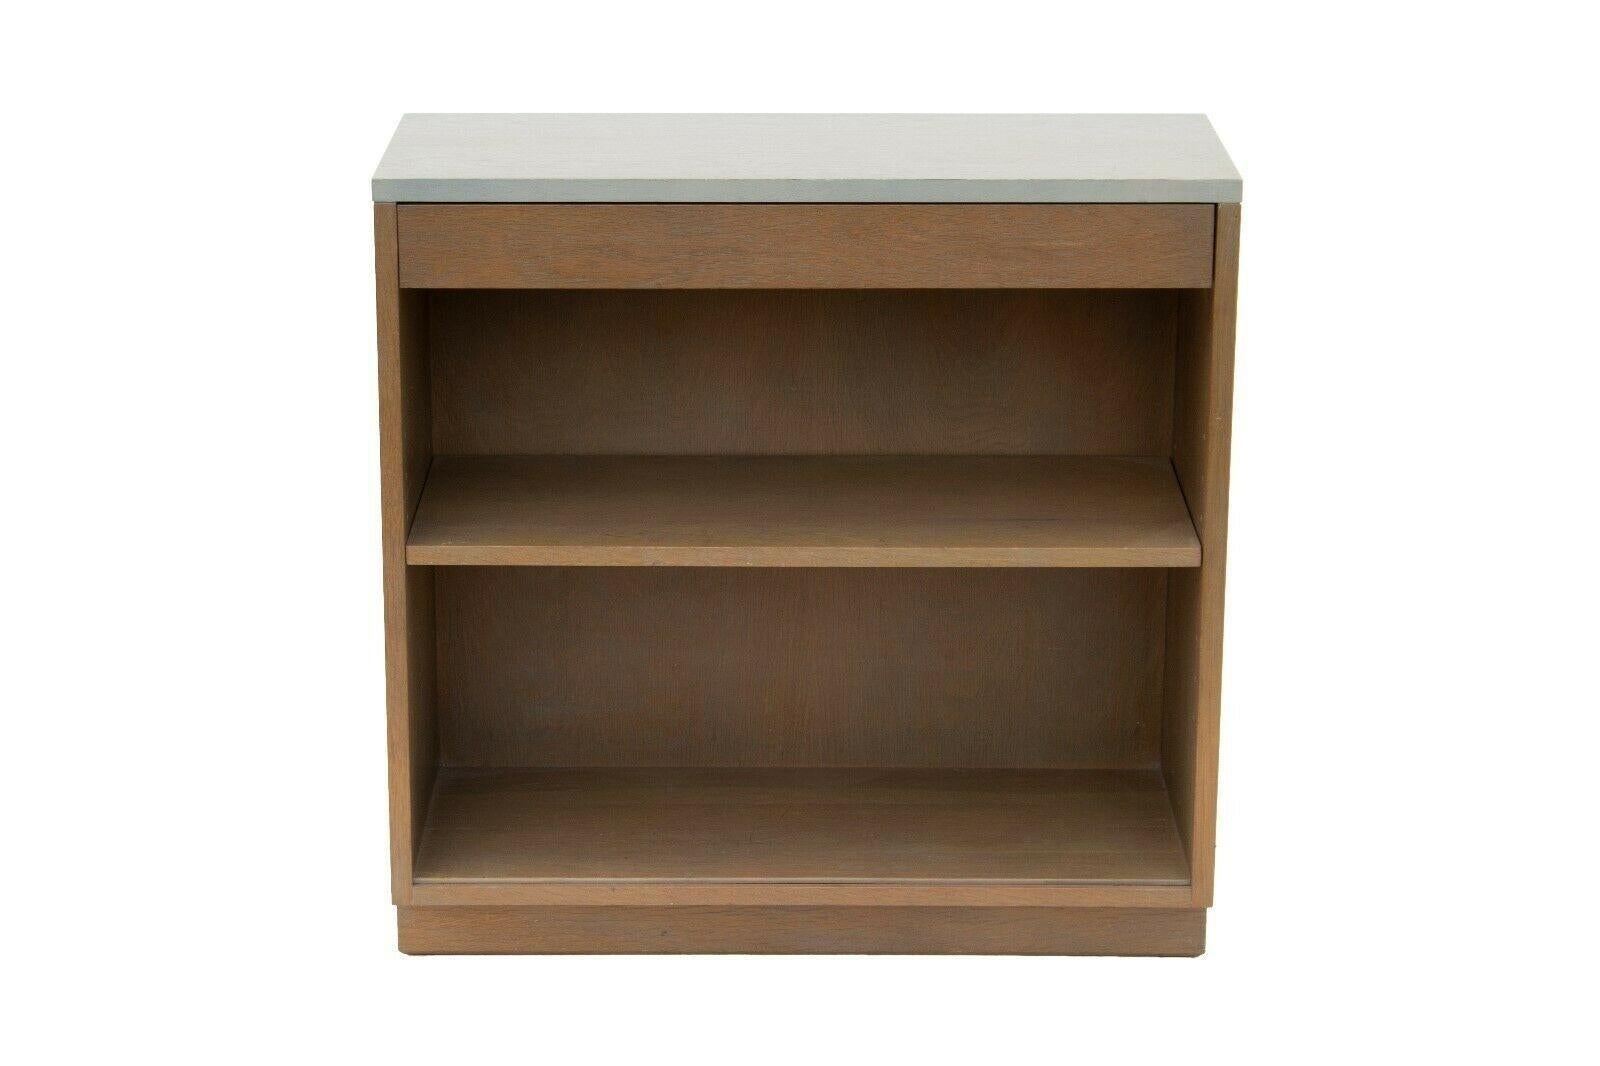 USA, 1970s.
Modern grey bookshelf by Cross Country by Sligh Furniture. This is a very nice size and well-built bookcase with a single drawer at the top and a single adjustable shelf. This could also be used as a nightstand. The neutral color and